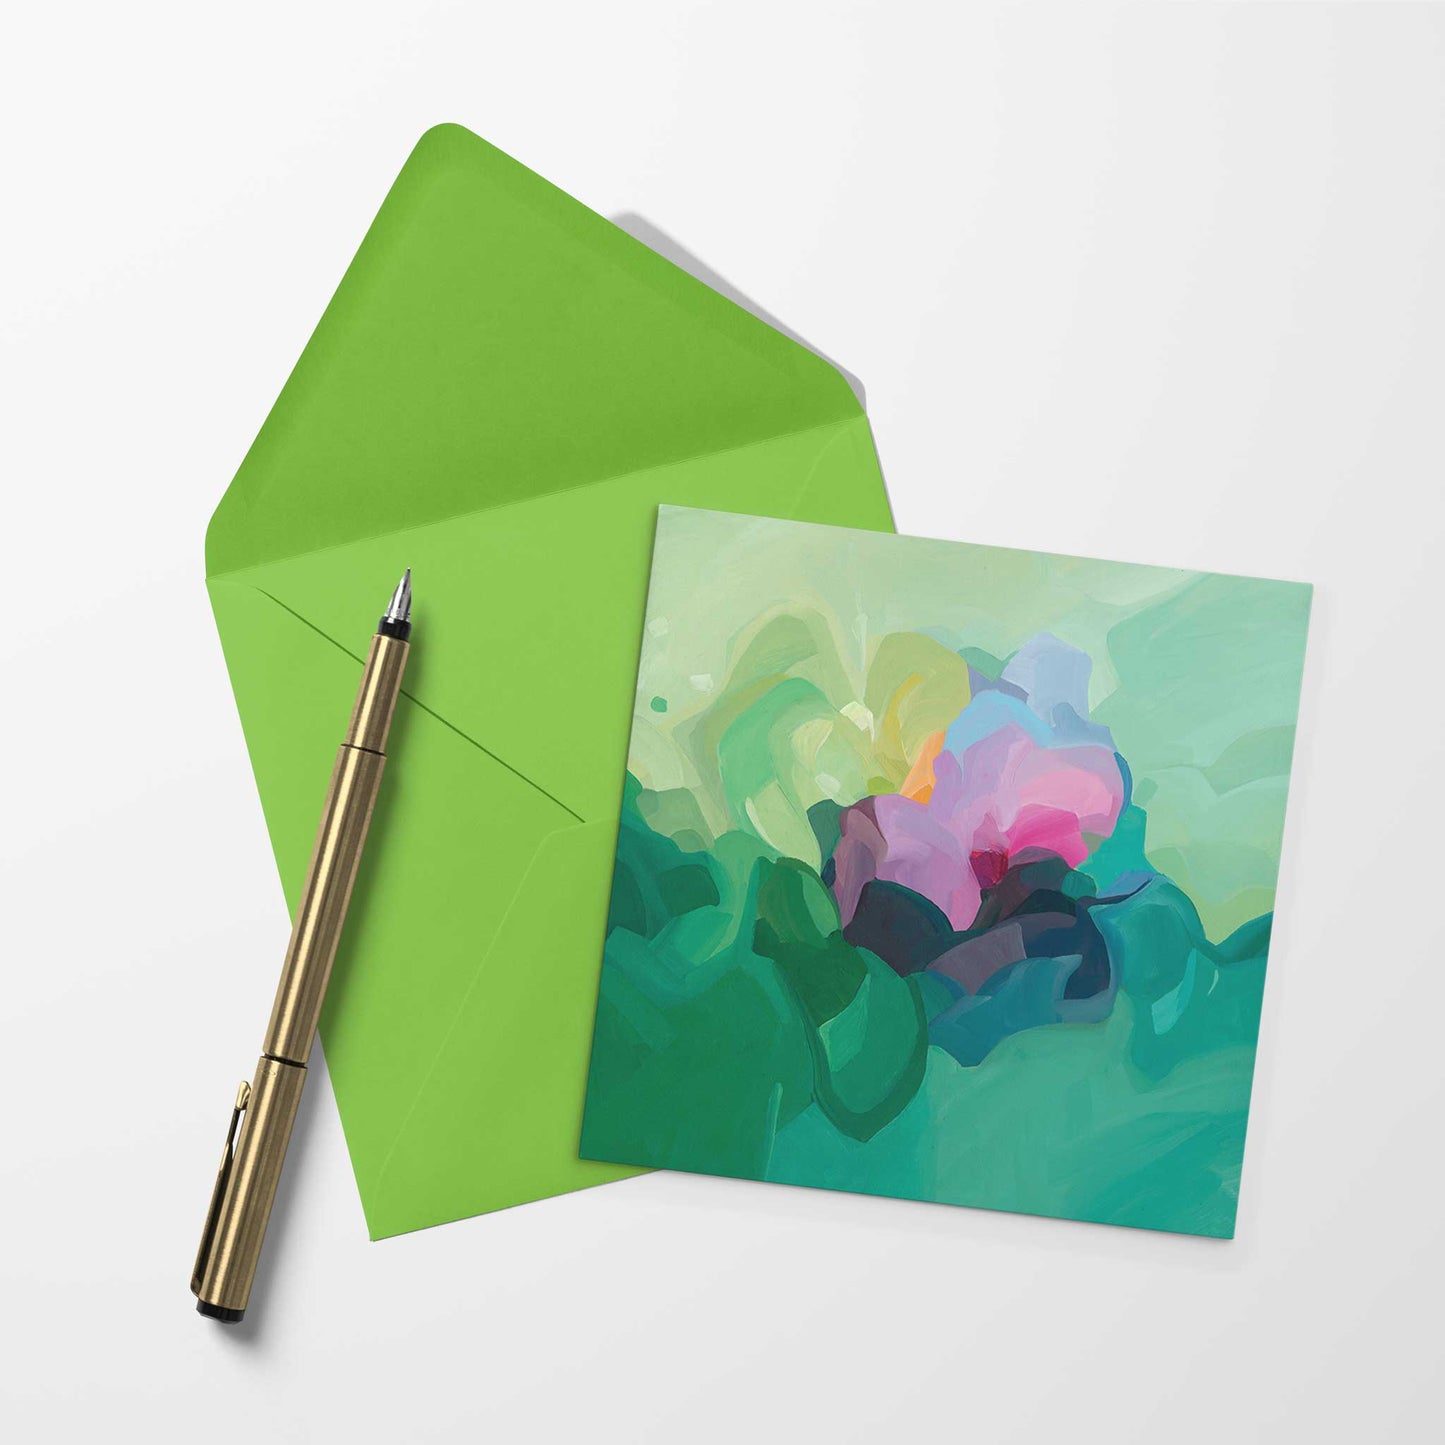 blank art card with jade green abstract artwork and lime green envelope